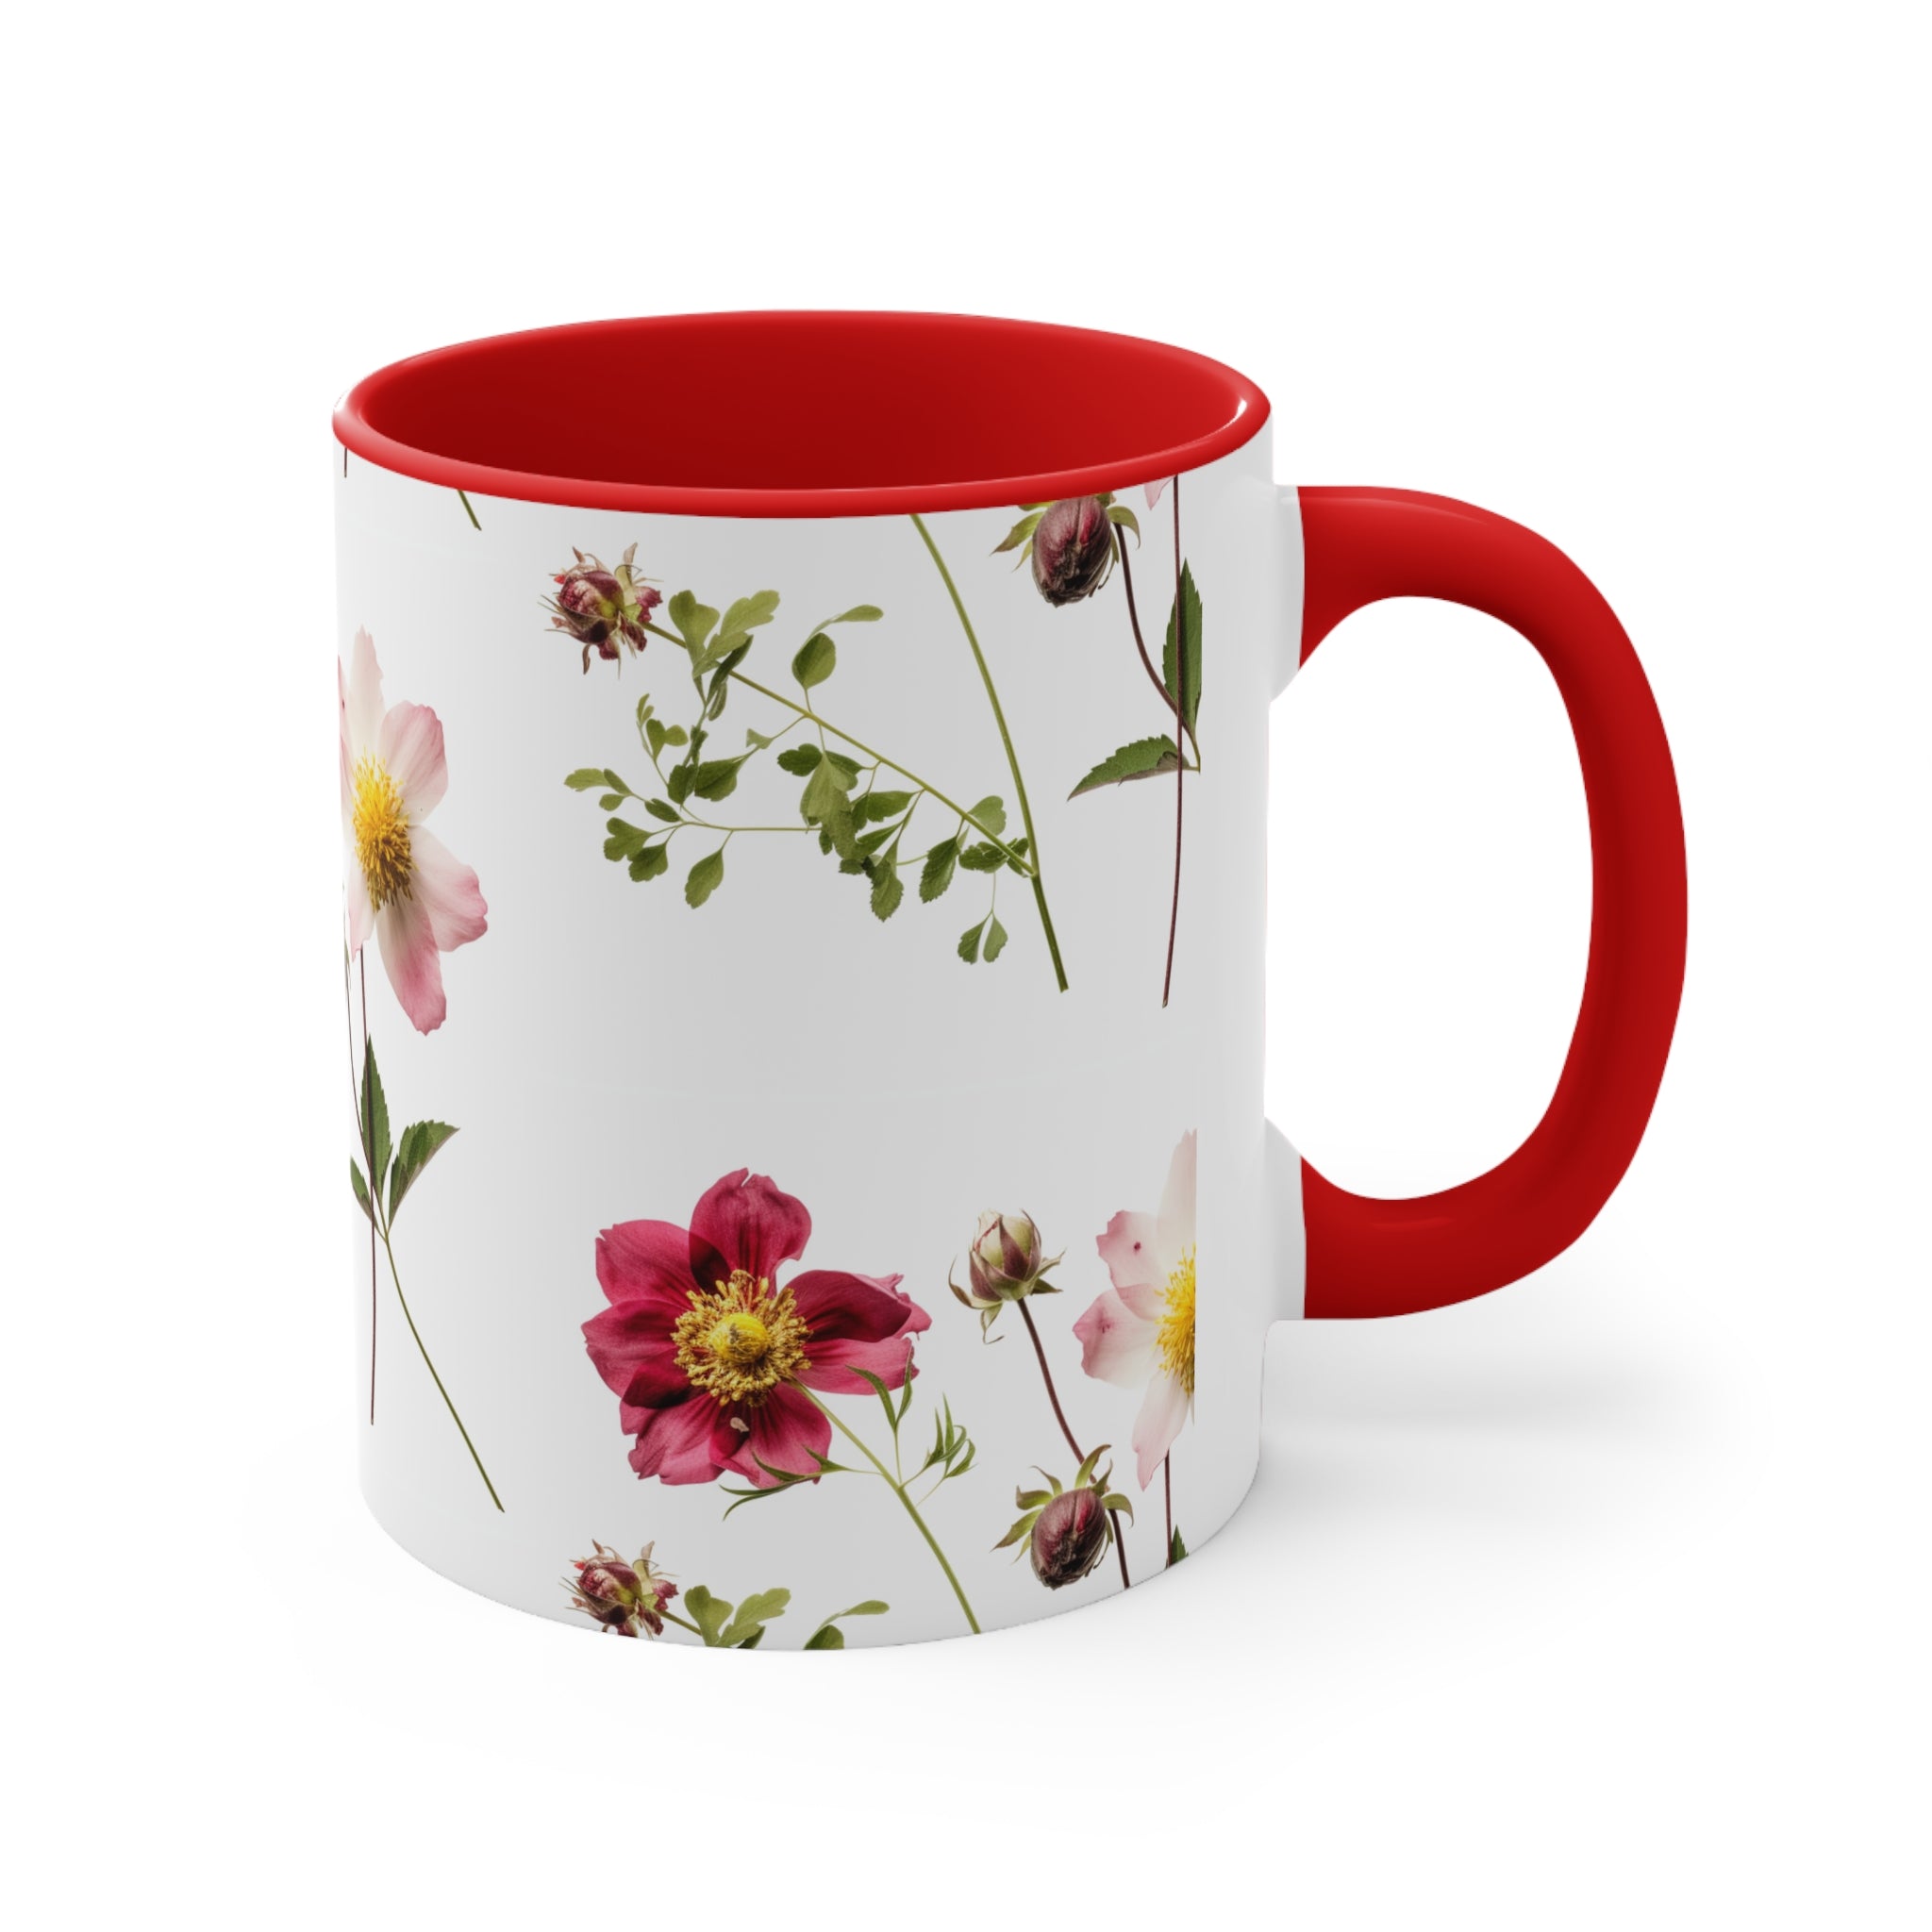 11oz accent coffee mug, Summer Flowers design, ceramic tea cup, handcrafted, vibrant floral gift, unique home decor